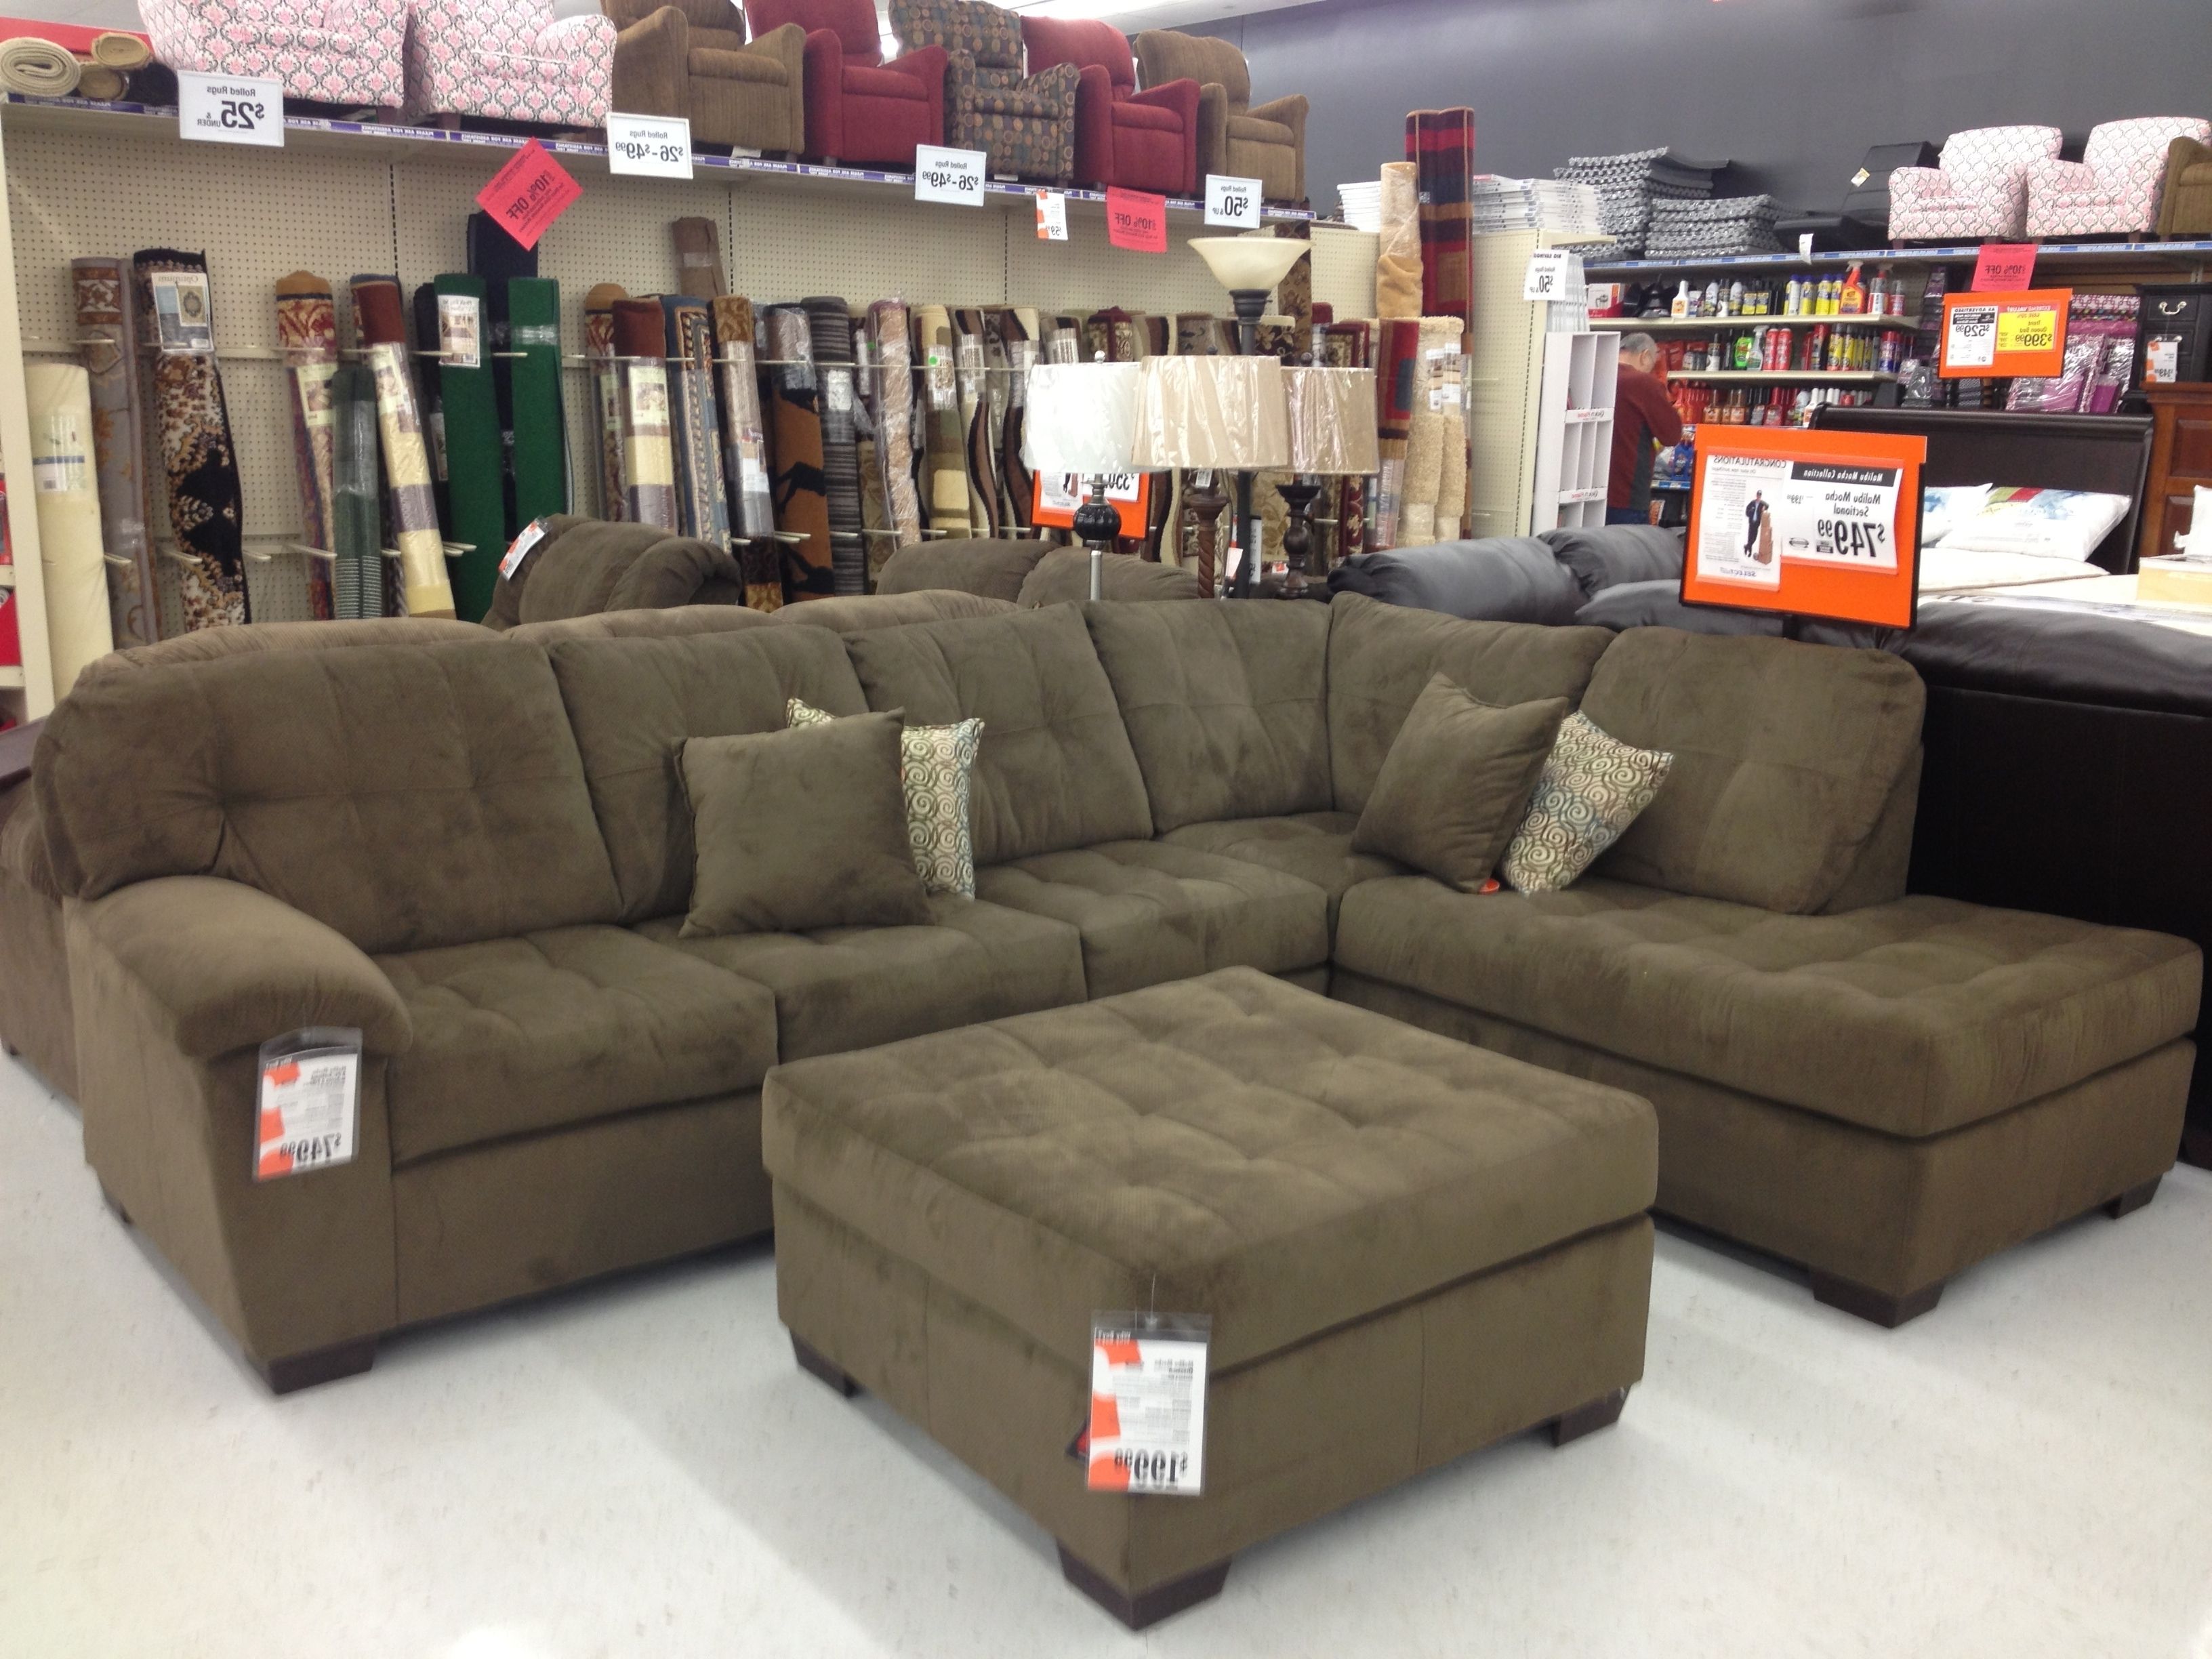 Featured Photo of The 15 Best Collection of Big Lots Sofas